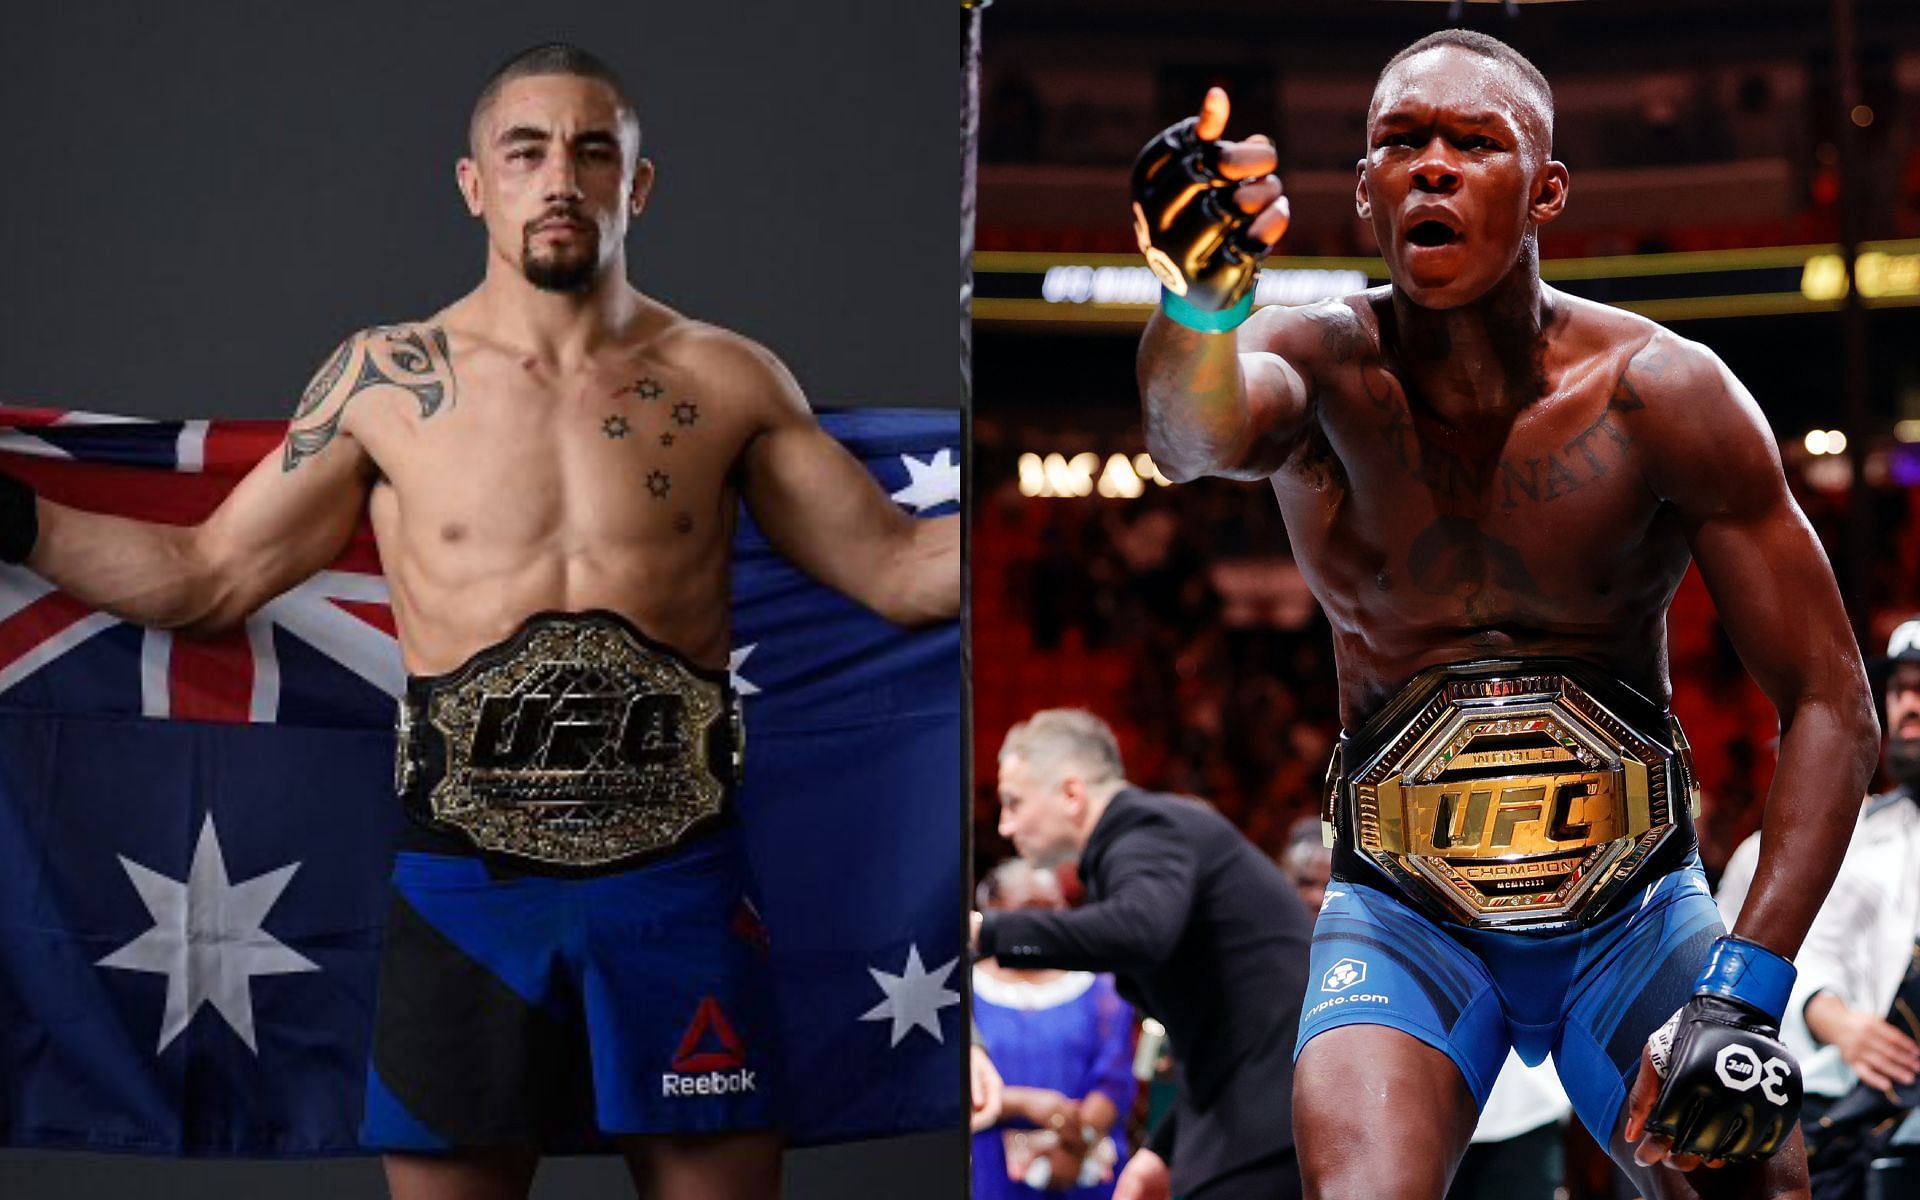 Robert Whittaker (Left) and Israel Adesanya (right) [Image credits: Getty Images, @jorwal123456 on Twitter]  